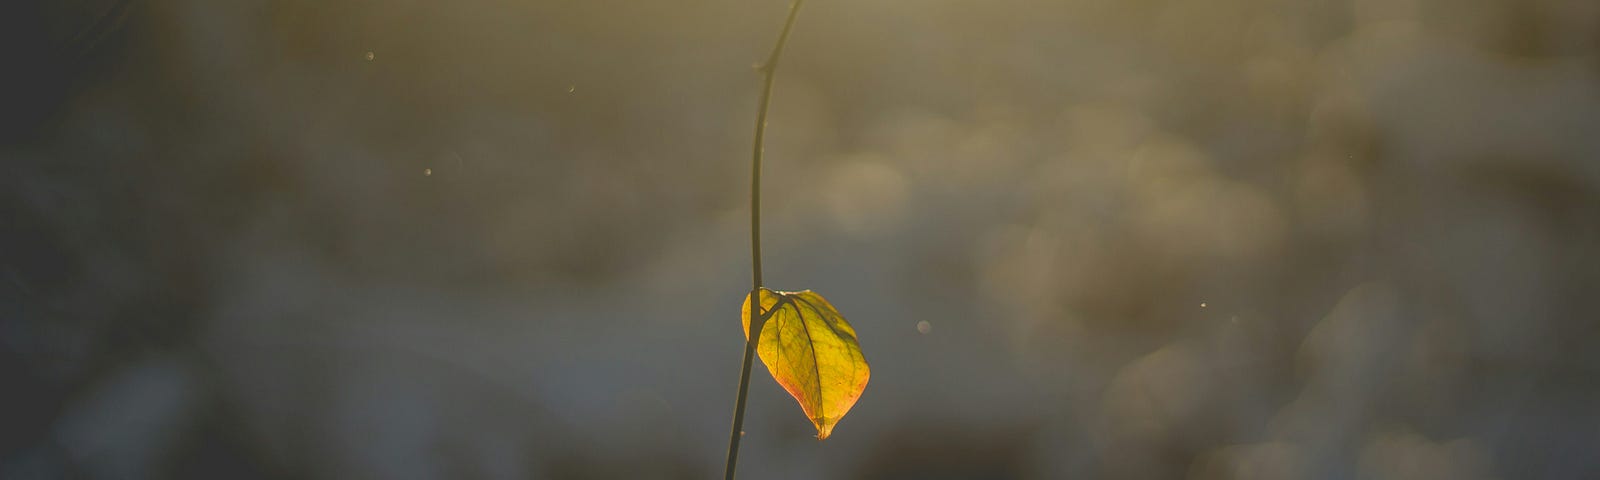 Single leaf on a slender tree branch in the morning sun